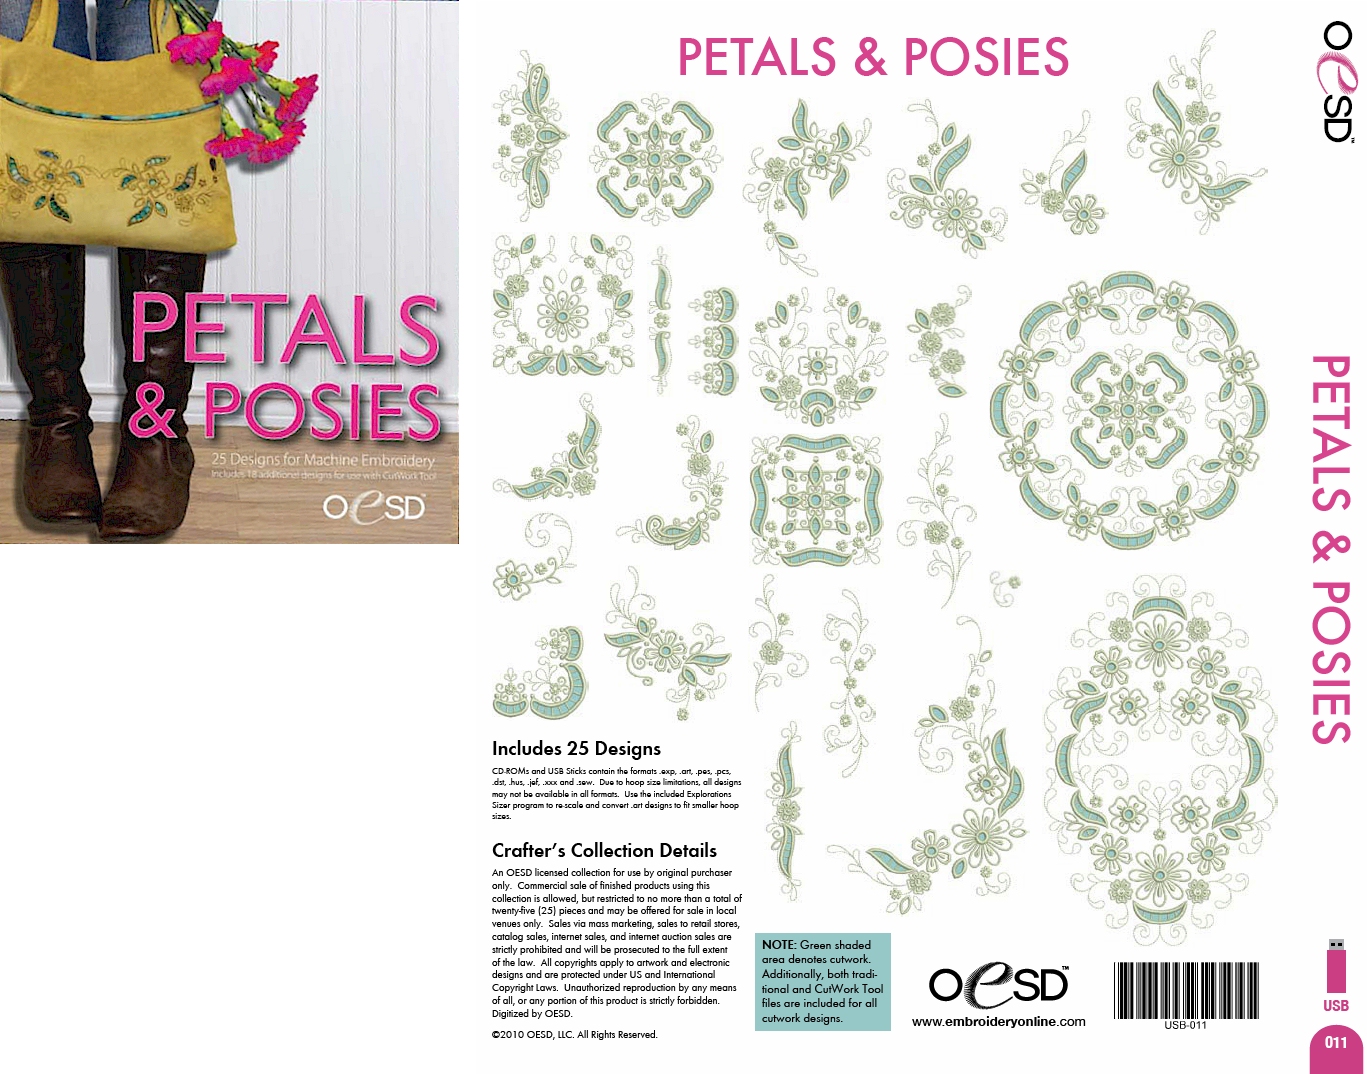 Petals & Posies Embroidery Designs on a Multi-Format CD-ROM CD-011